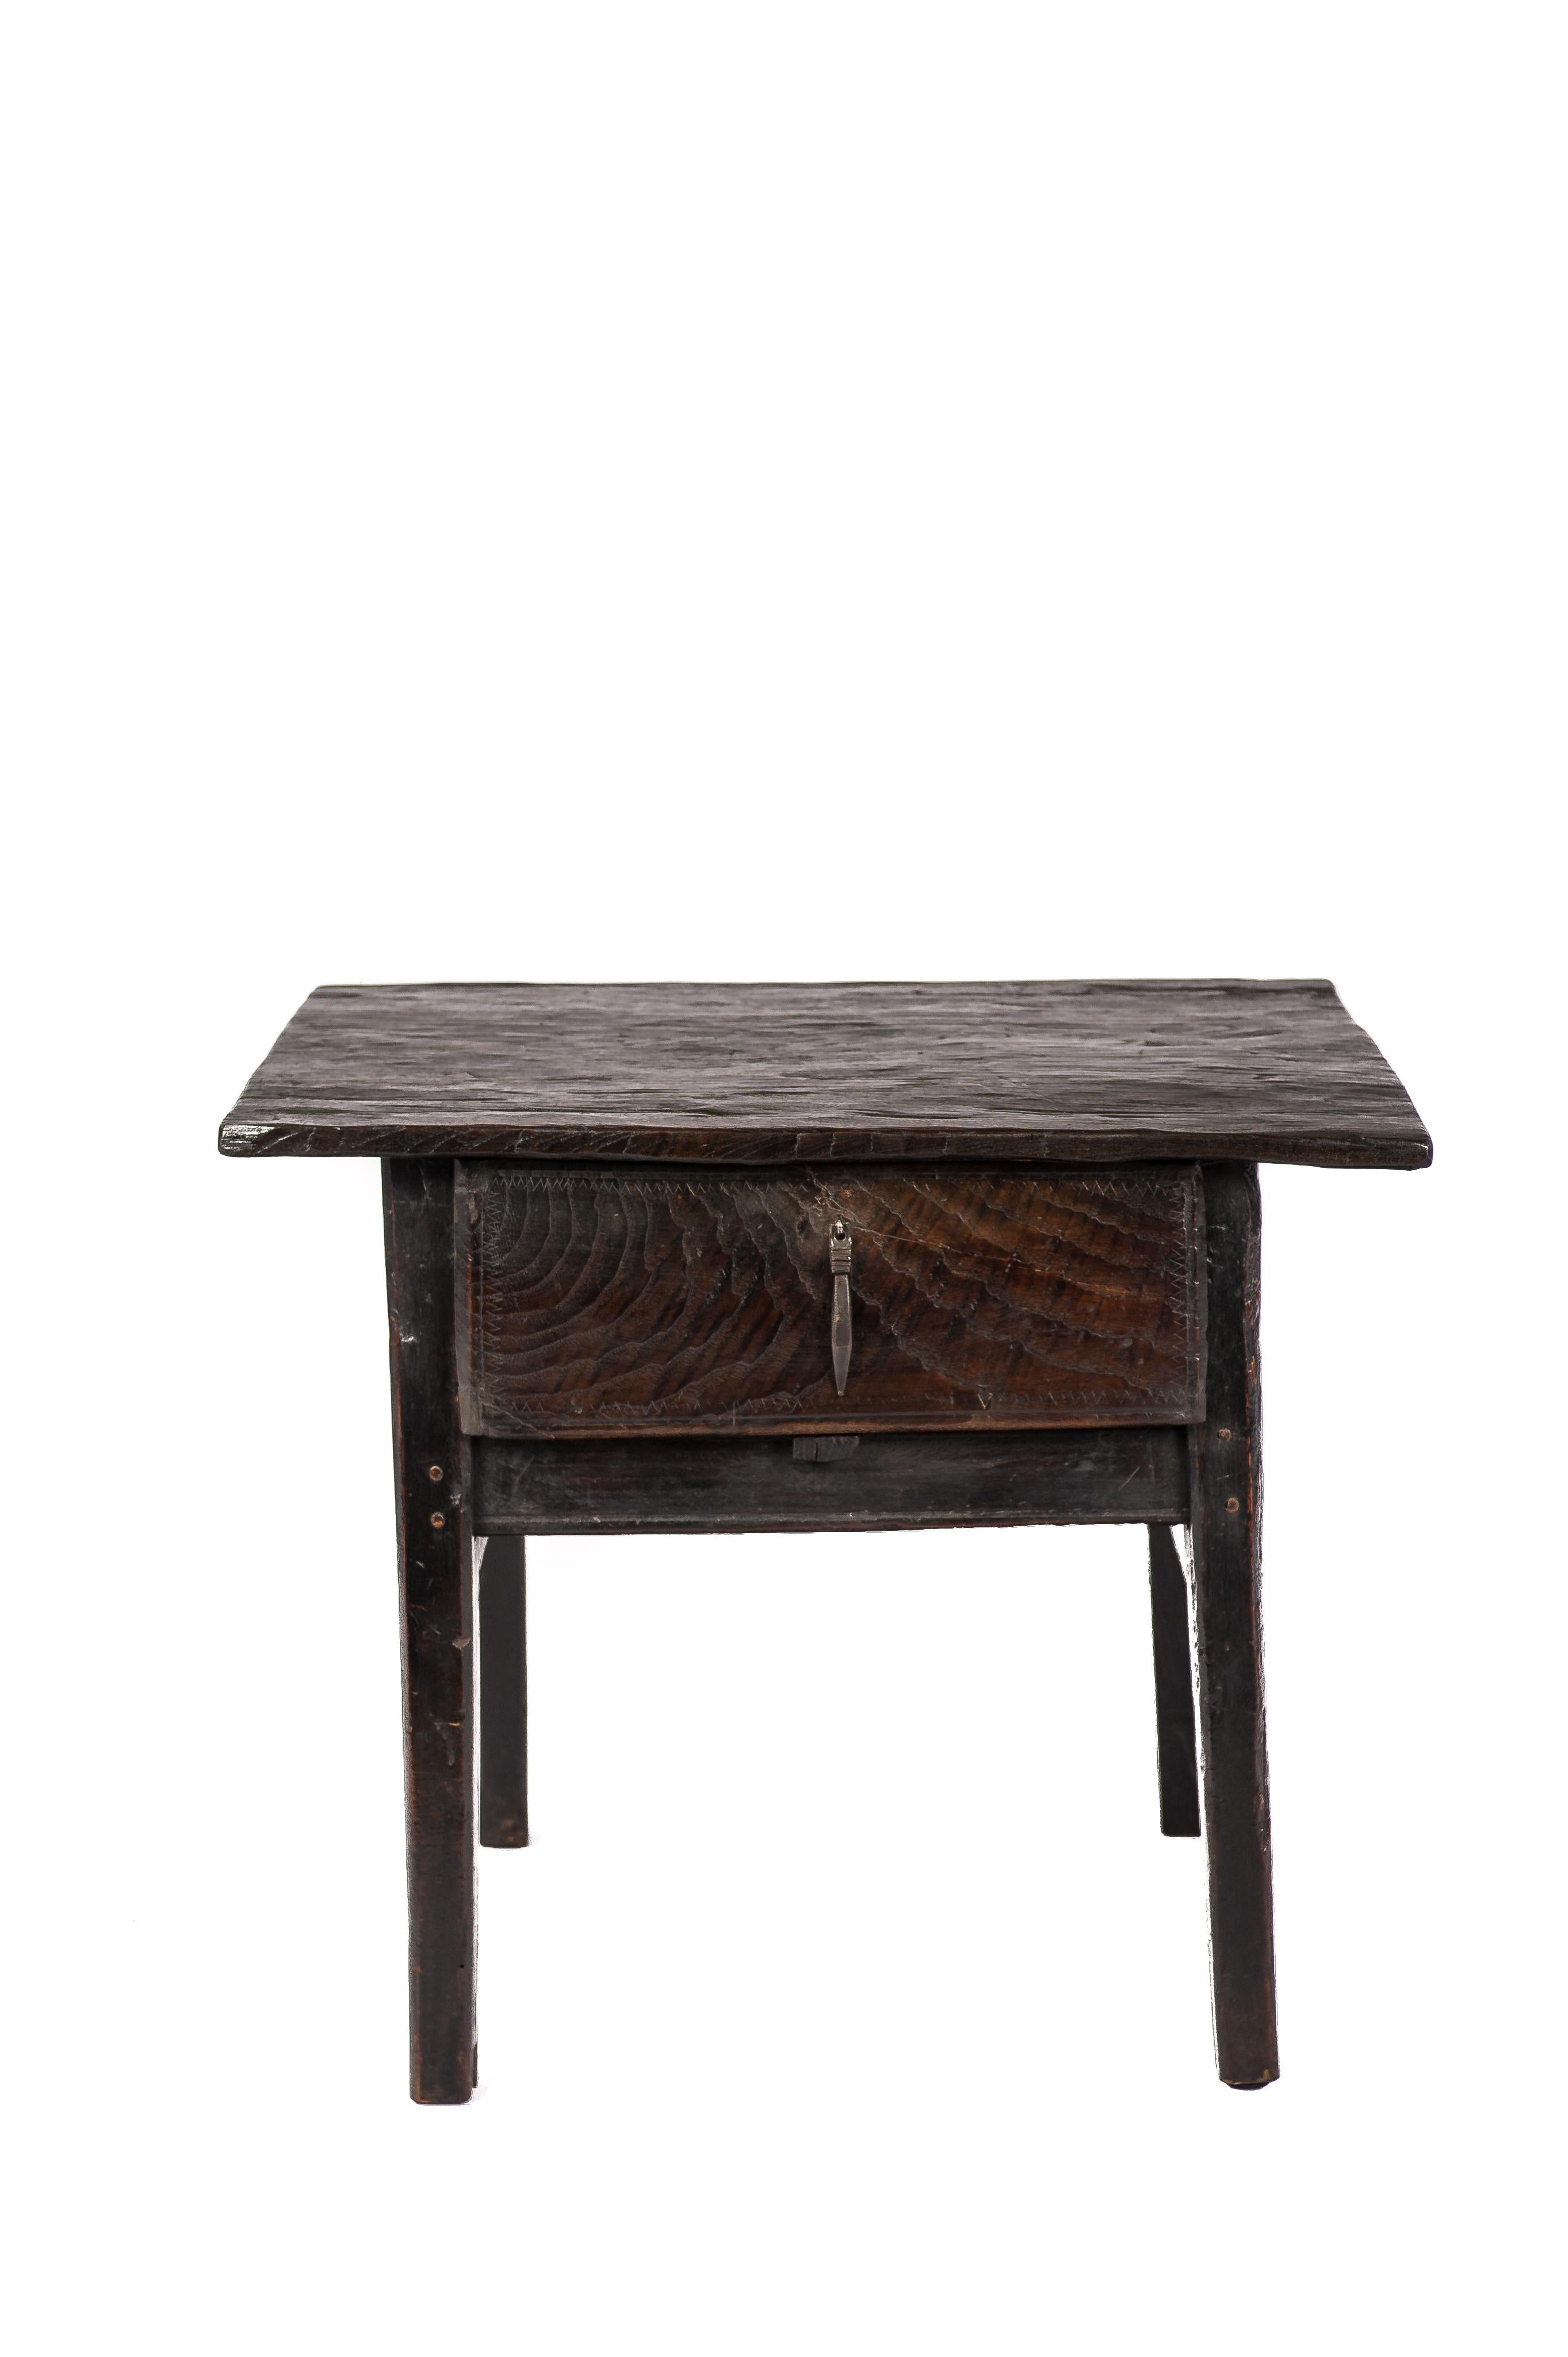 A beautiful antique side table or occasional table that was made in rural Spain circa 1750. The solid hand-carved chestnut rectangular top was made from a single board of wood and was jointed to the base by forged steel nails. The table features a